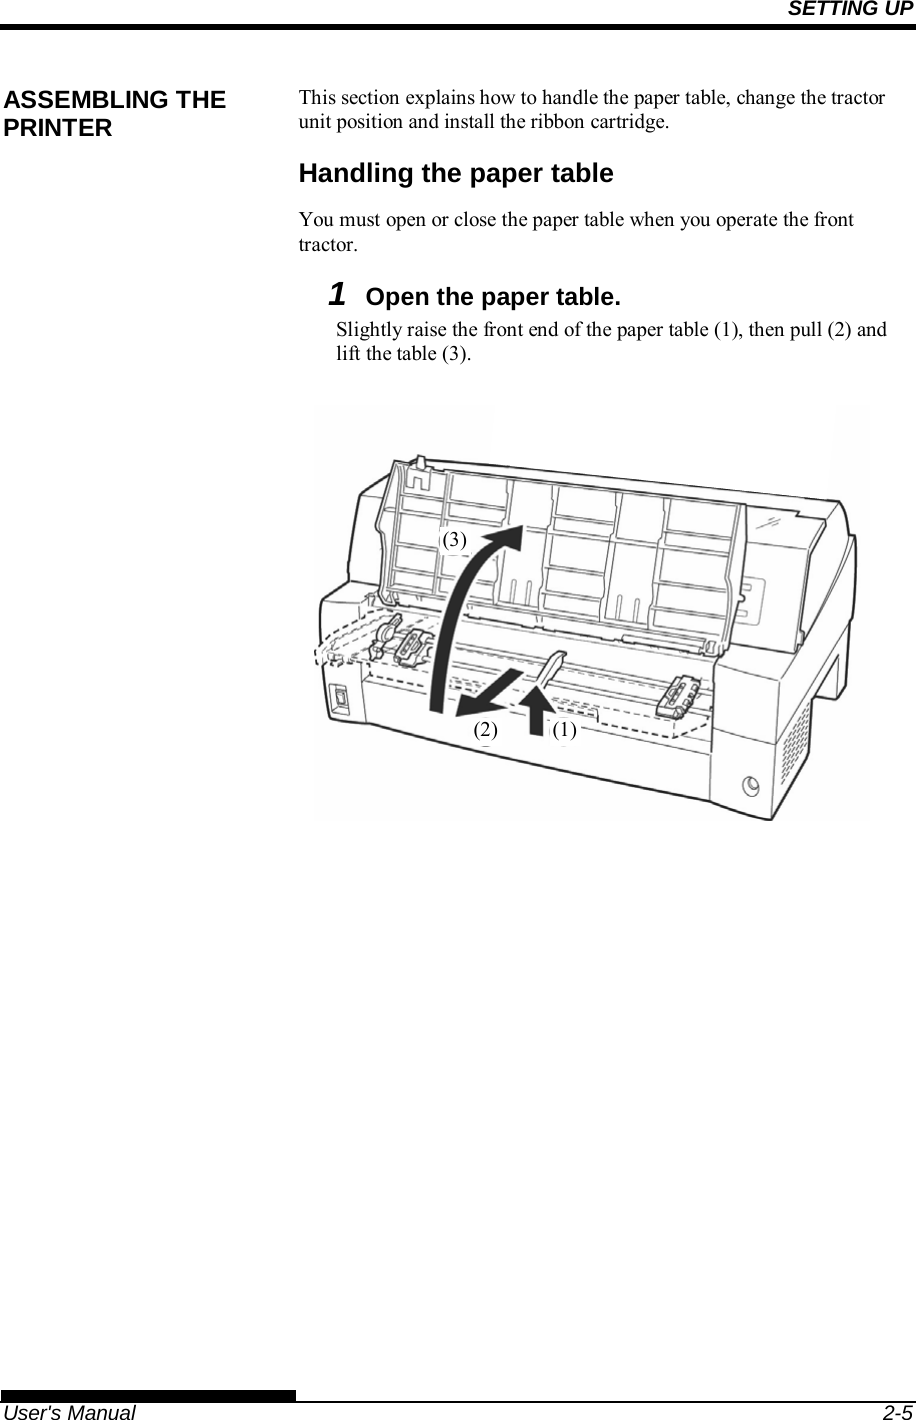 SETTING UP   User&apos;s Manual  2-5 This section explains how to handle the paper table, change the tractor unit position and install the ribbon cartridge. Handling the paper table You must open or close the paper table when you operate the front tractor.  1  Open the paper table. Slightly raise the front end of the paper table (1), then pull (2) and lift the table (3).    ASSEMBLING THE PRINTER (1)(2)(3)